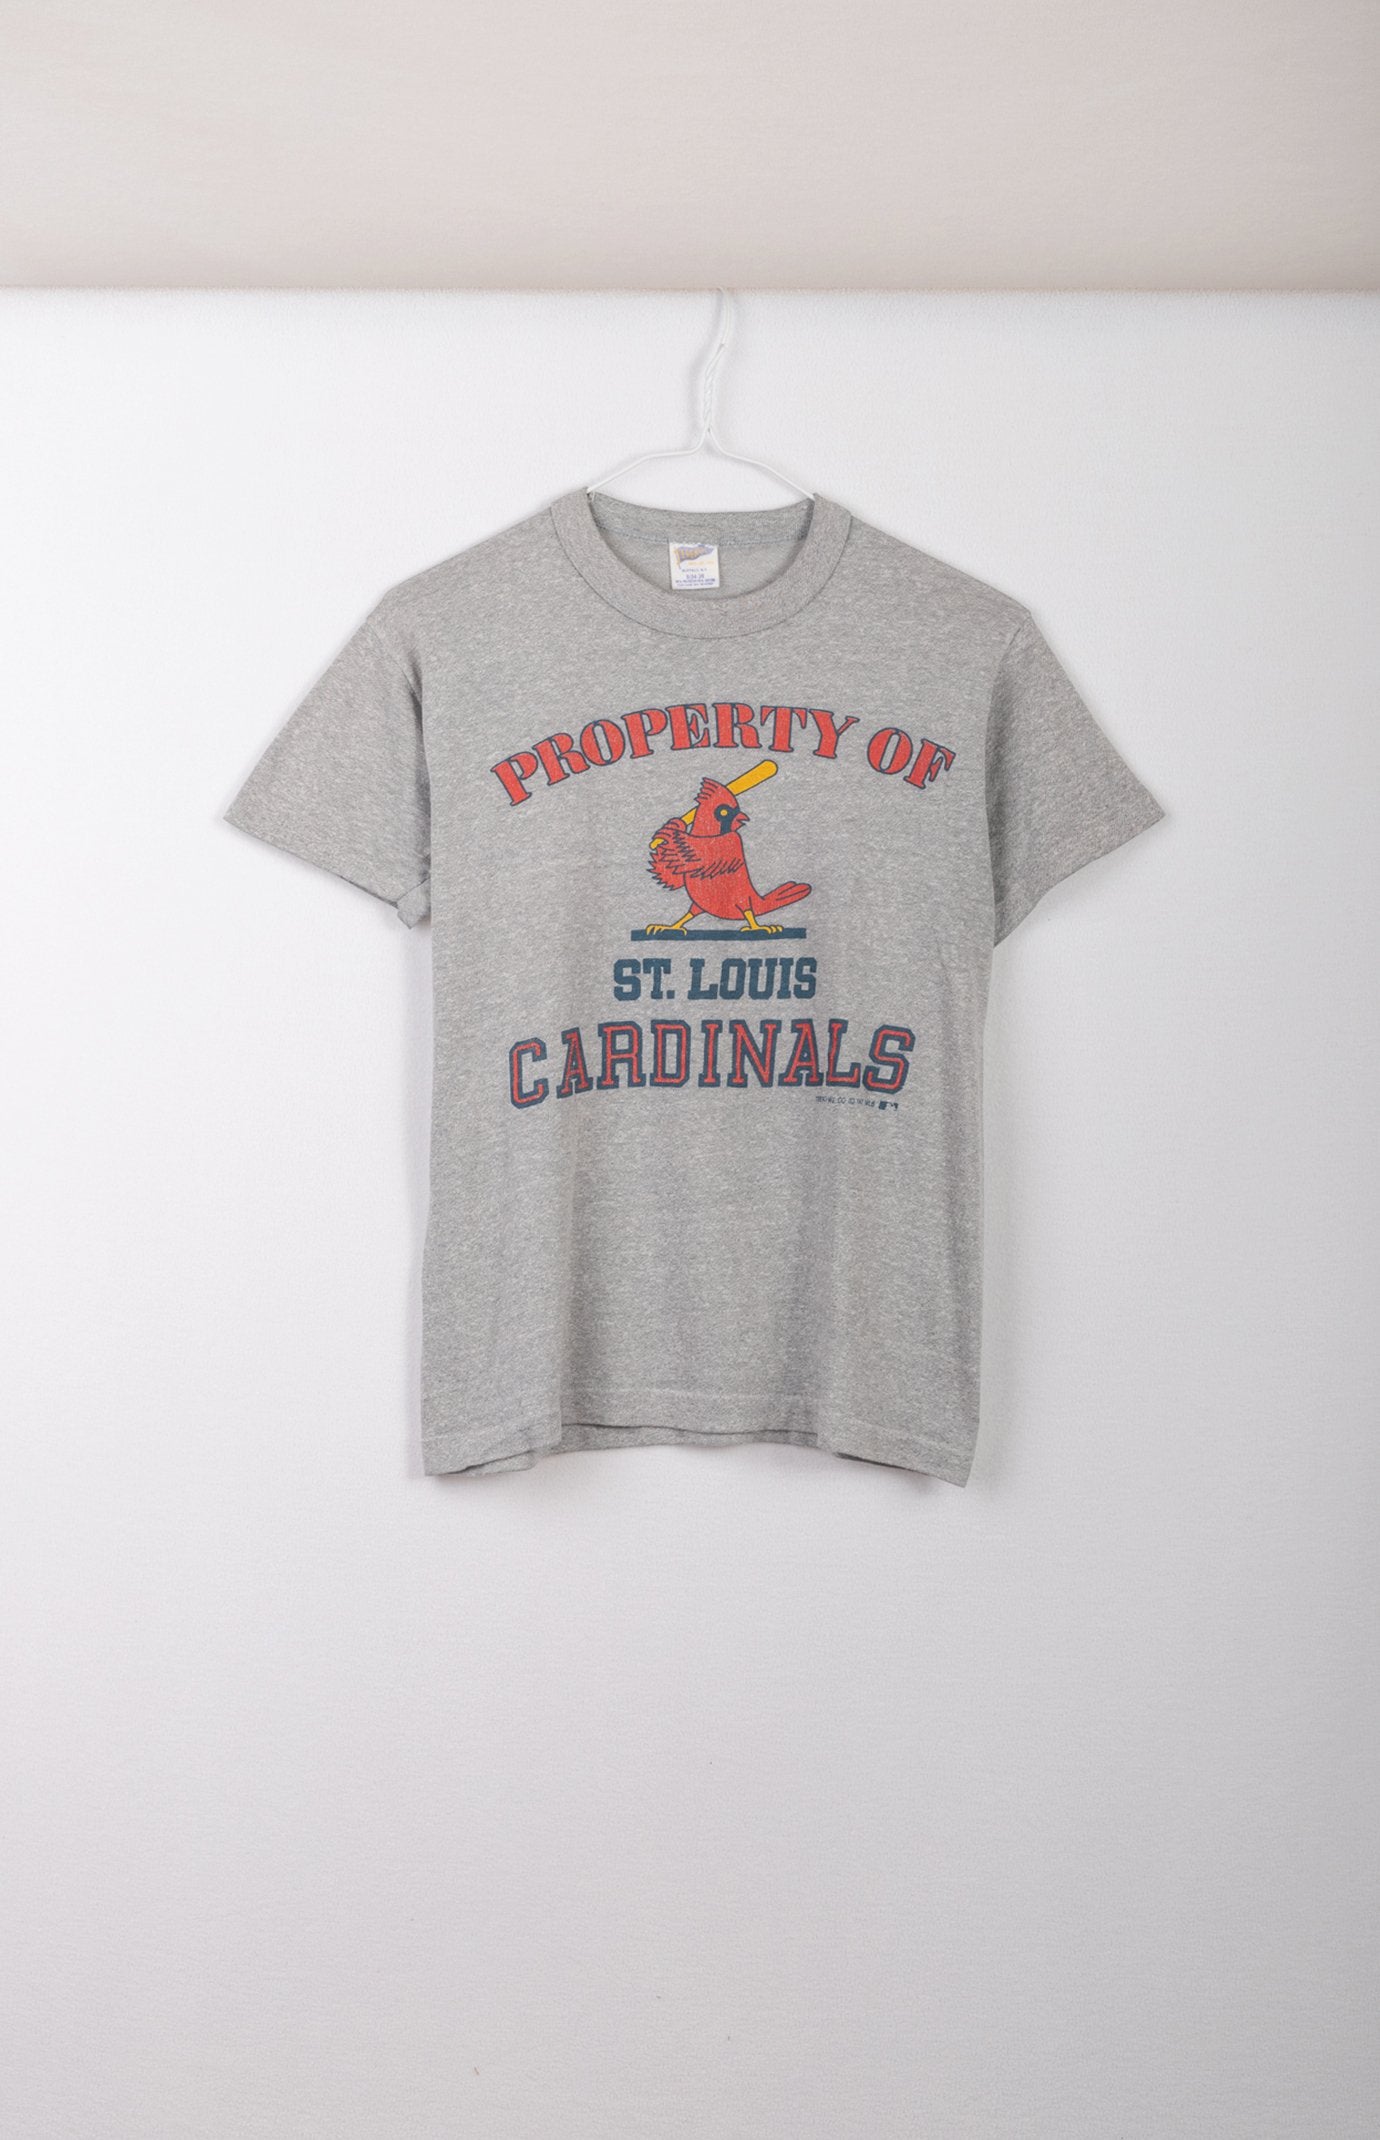 Vintage MLB St. Louis Cardinals Red Tshirt 1987 Made in USA